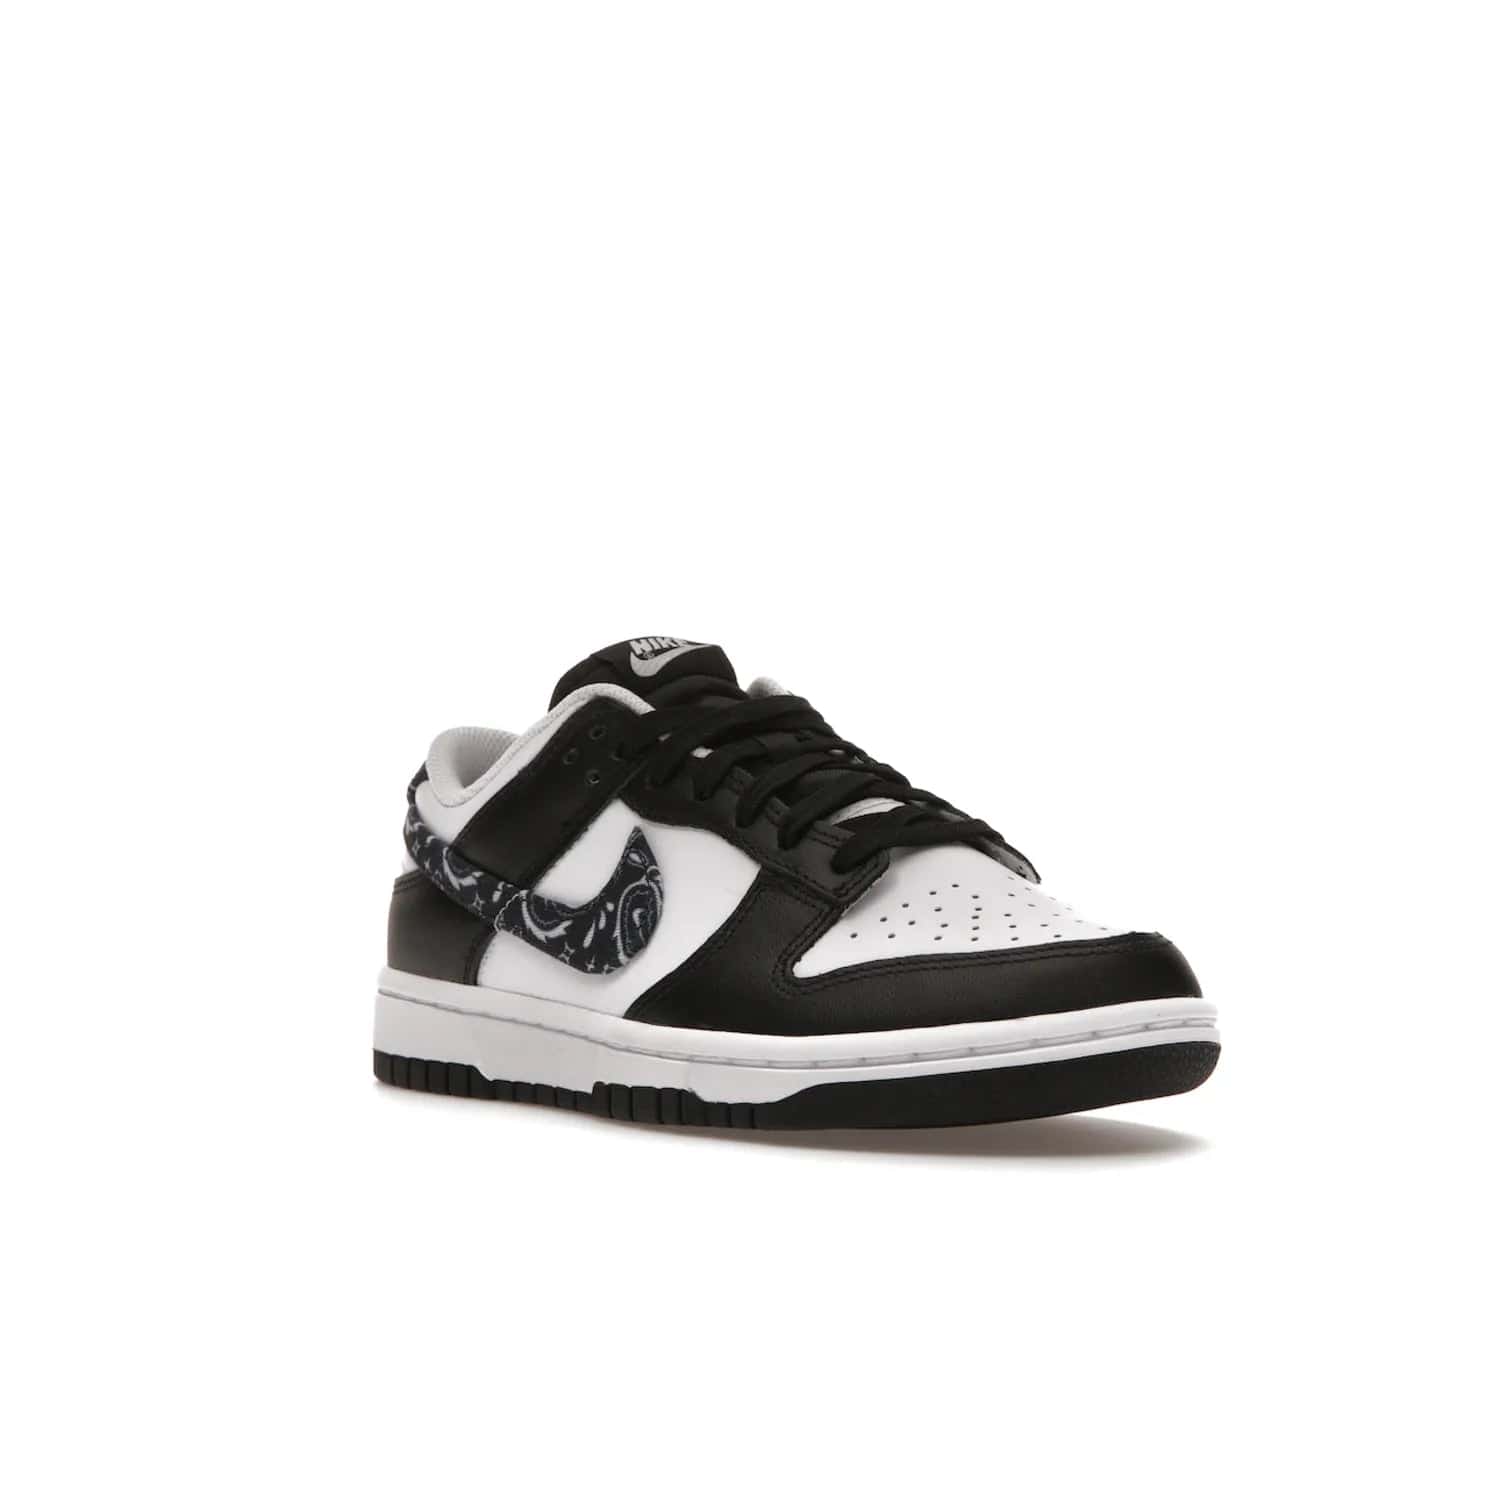 Nike Dunk Low Essential Paisley Pack Black (Women's) - Image 6 - Only at www.BallersClubKickz.com - Make a statement with the all-black Nike Dunk Low Essential Paisley Pack Black (Women's) featuring white leather overlays, a stunning paisley bandana print, and a white midsole for comfort and optimal grip on any surface.